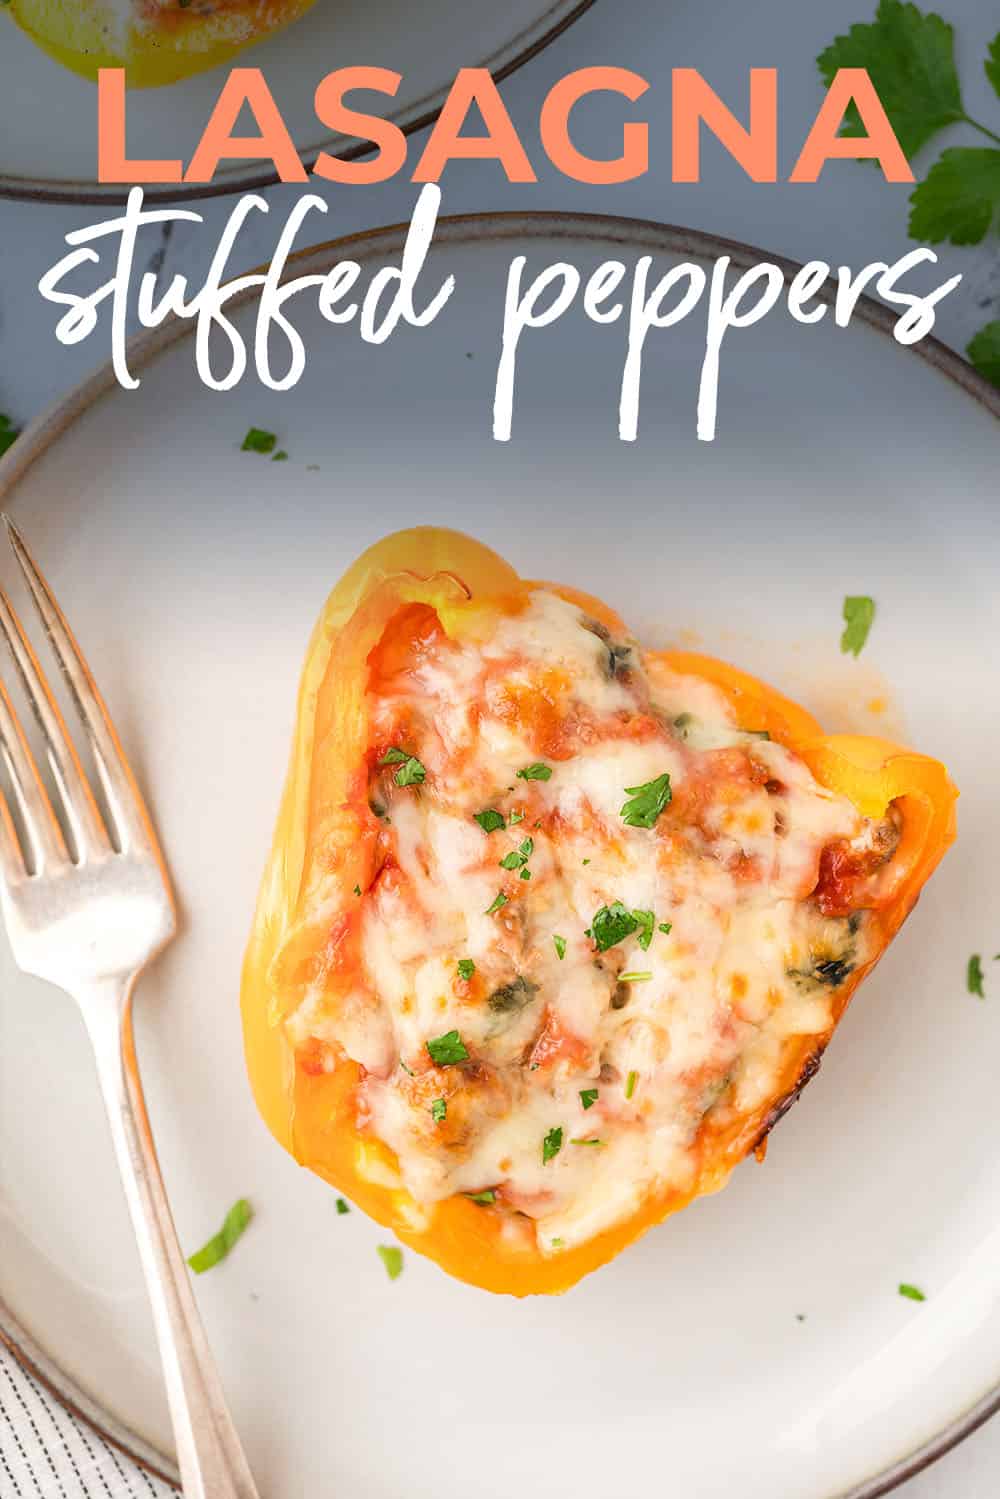 Lasagna stuffed pepper on small white plate next to a fork.